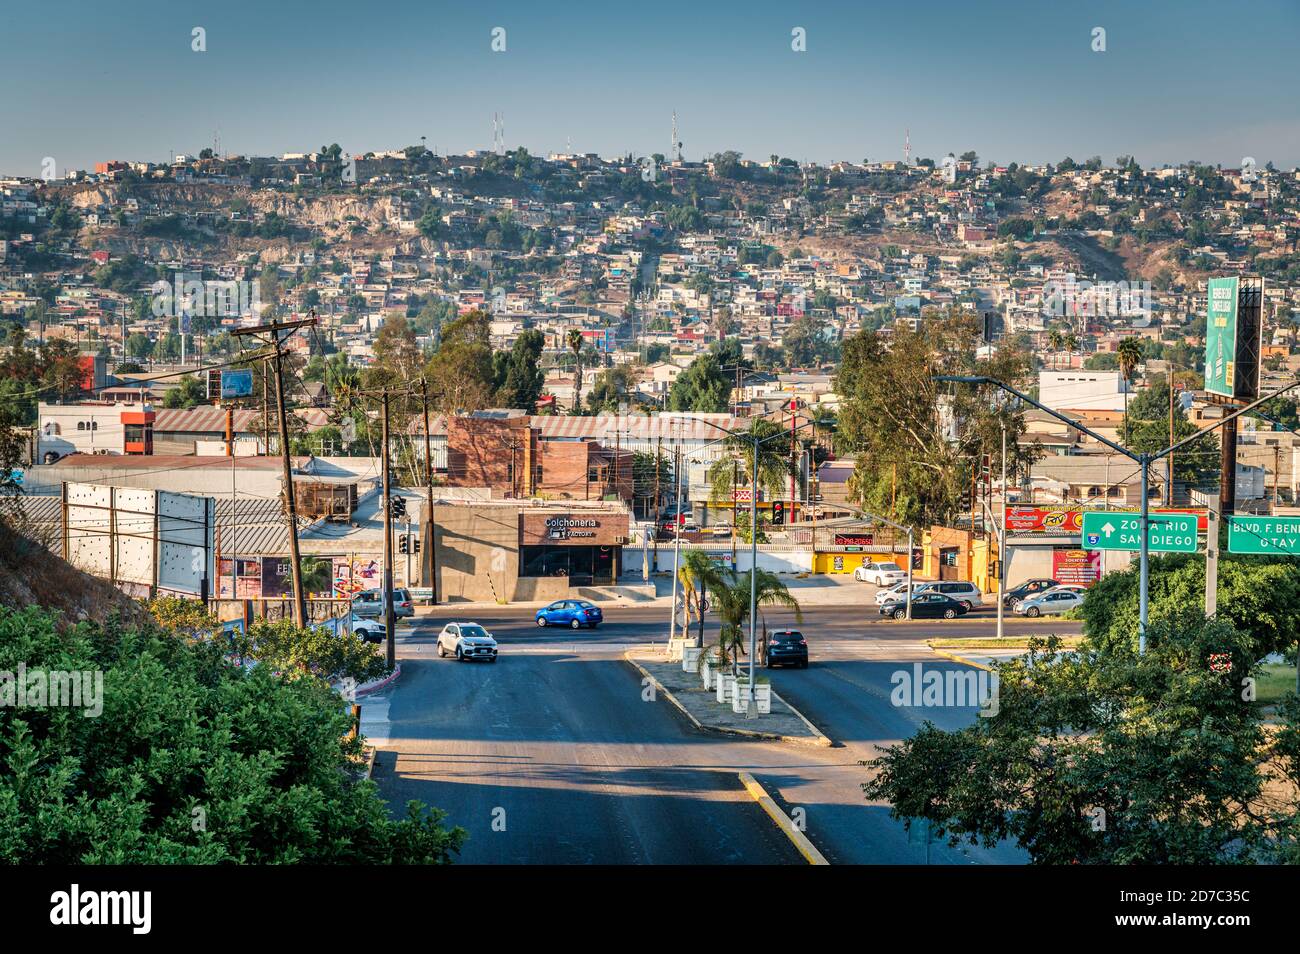 View of poor area of Tijuana Mexico with buildings on hill.  Stock Photo